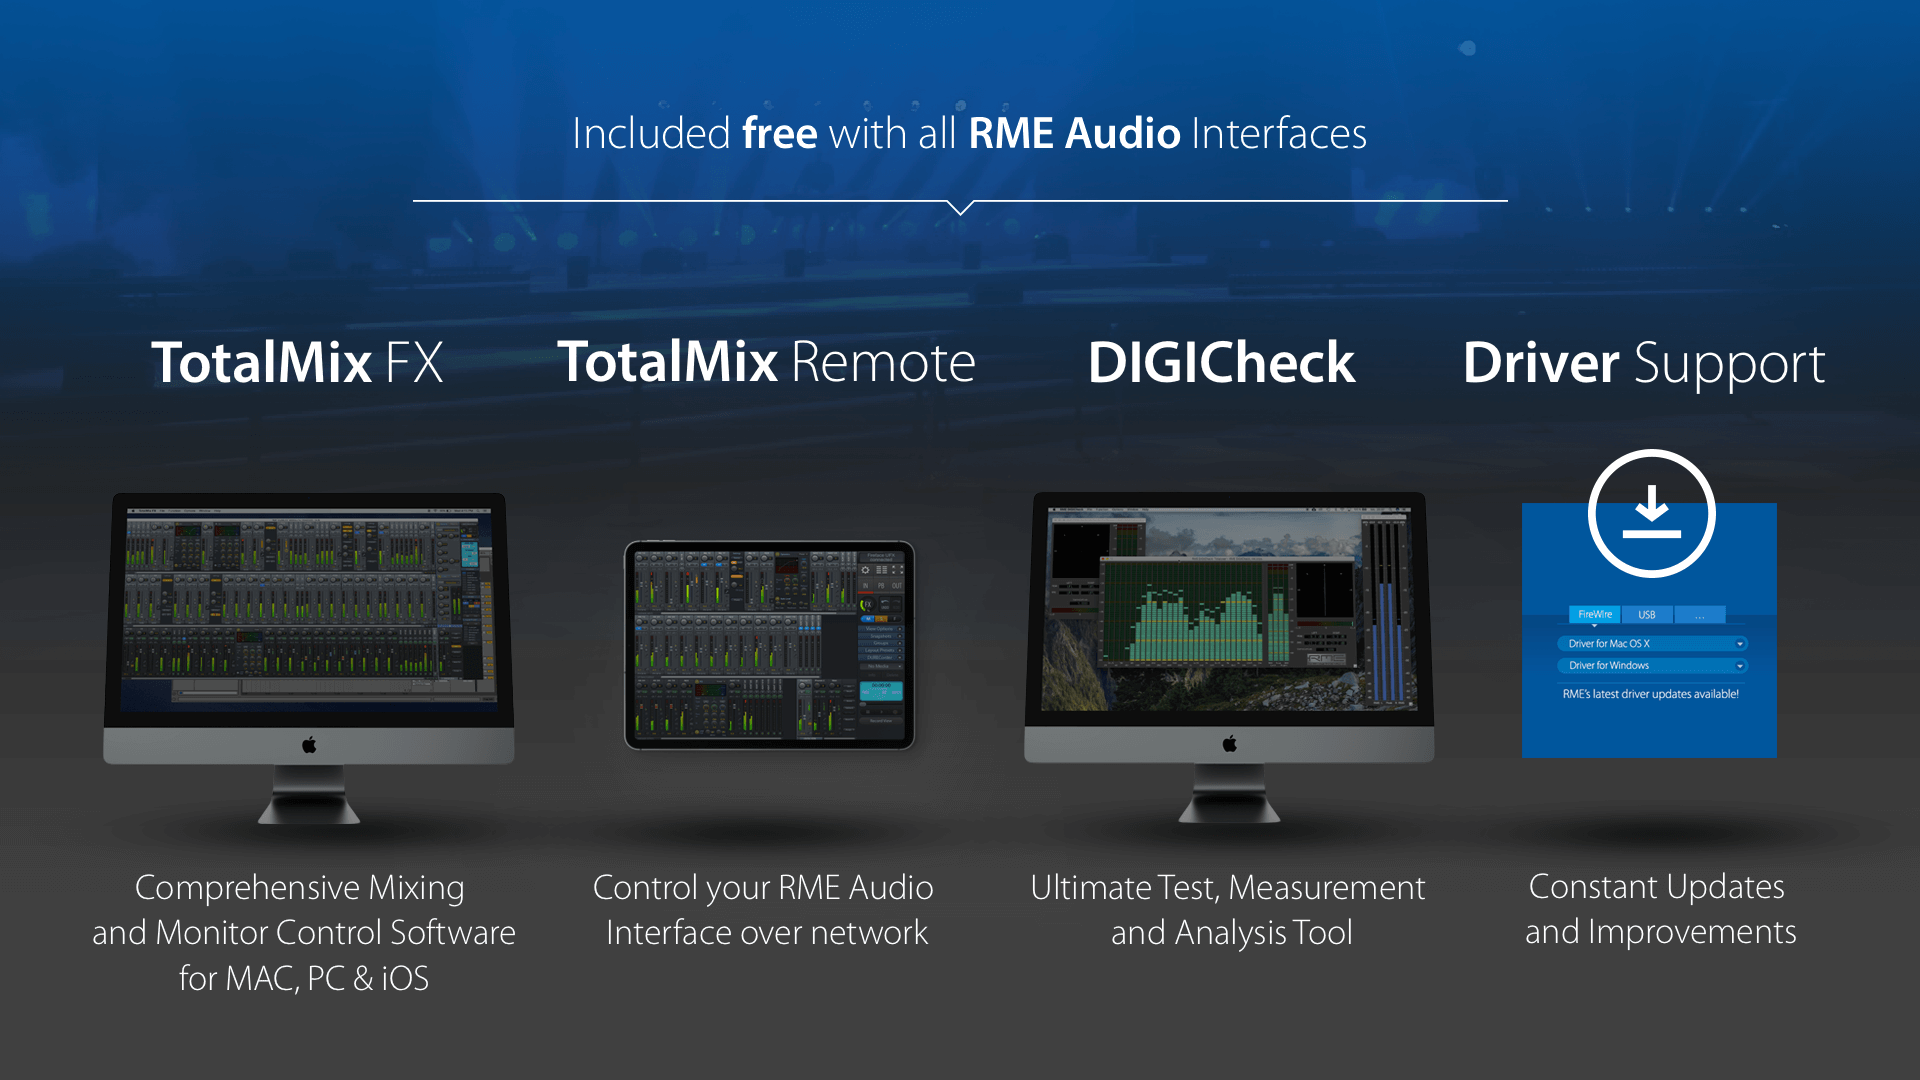 Free Software for all RME Audio Interfaces